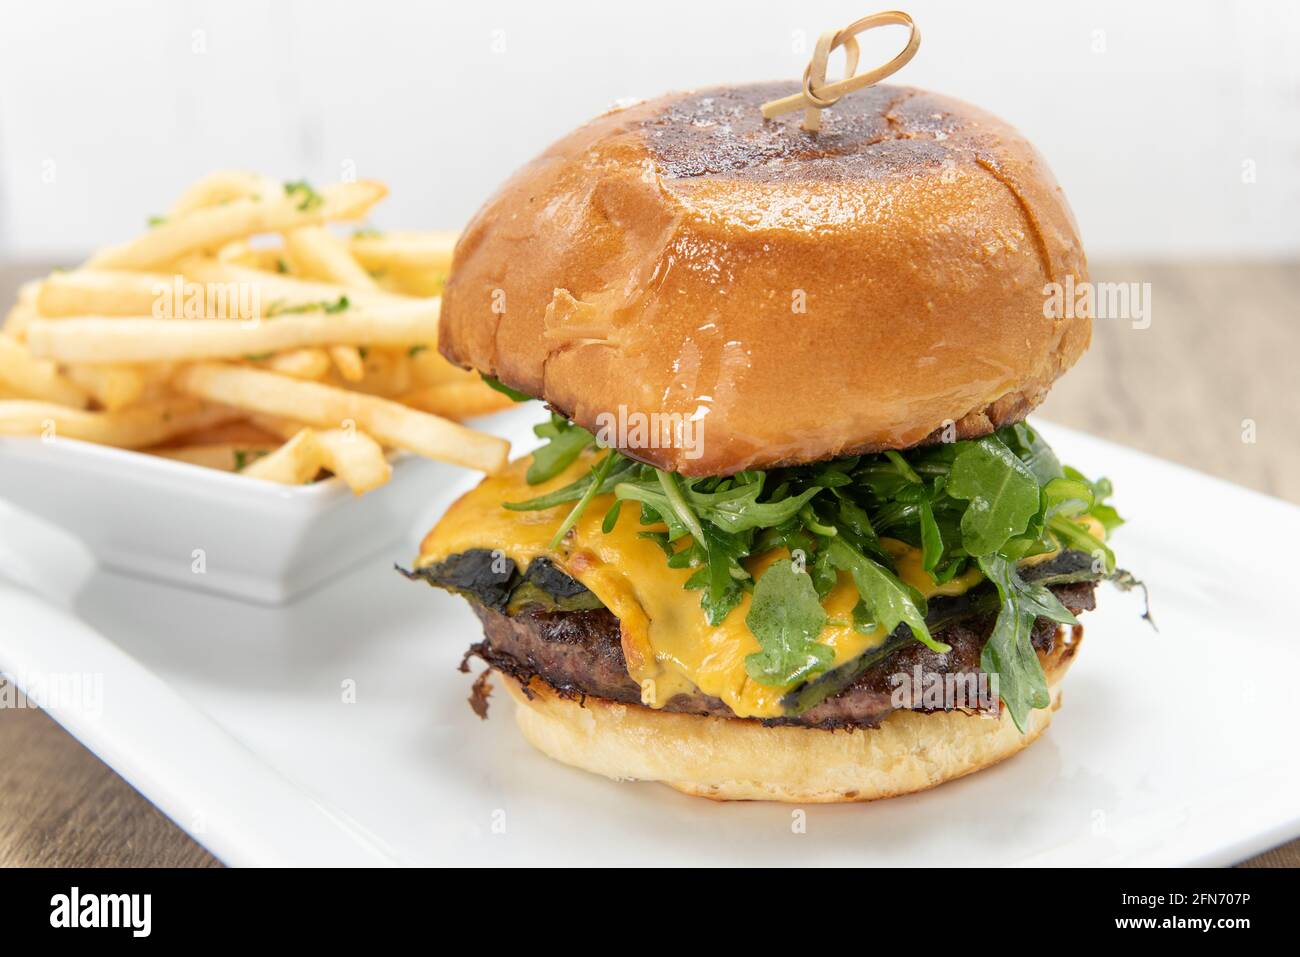 Enormous cheeseburger loaded with hamburger patty and melted cheese included french fries. Stock Photo